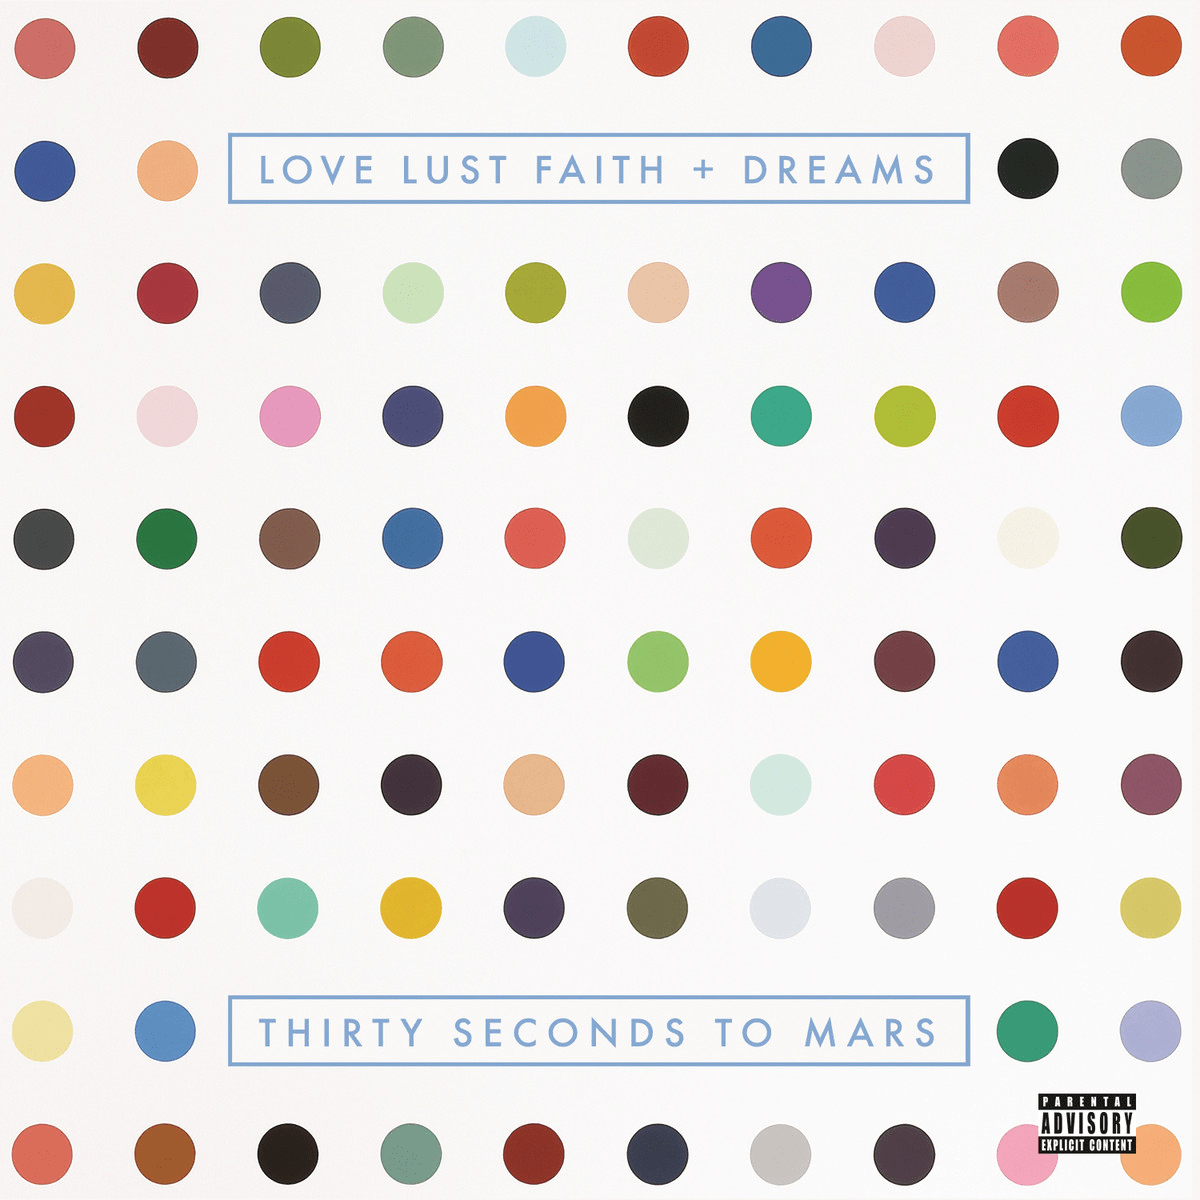 30 seconds to mars nouvel album - 30 Seconds To Mars - LOVE LUST FAITH + DREAMS Thirty Secons to Mars Love Lust Faith + Dreams 2013